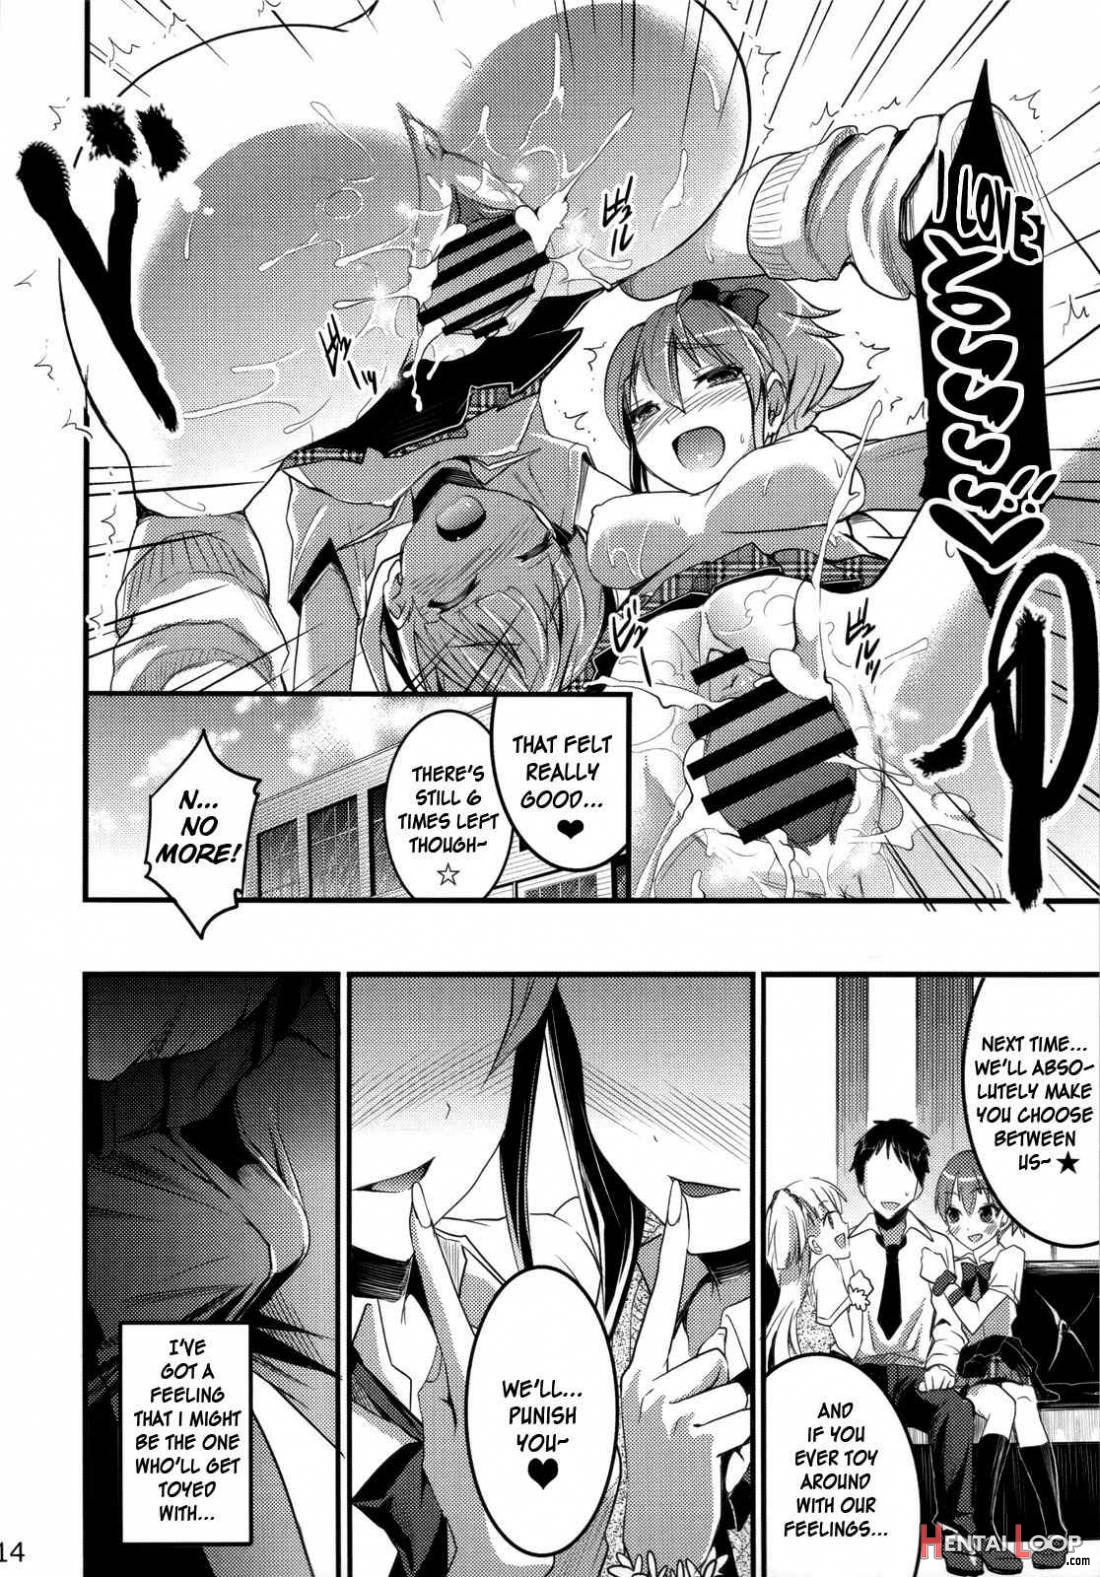 The Jougasaki Sisters’ All-out Love Attack + Omake page 13